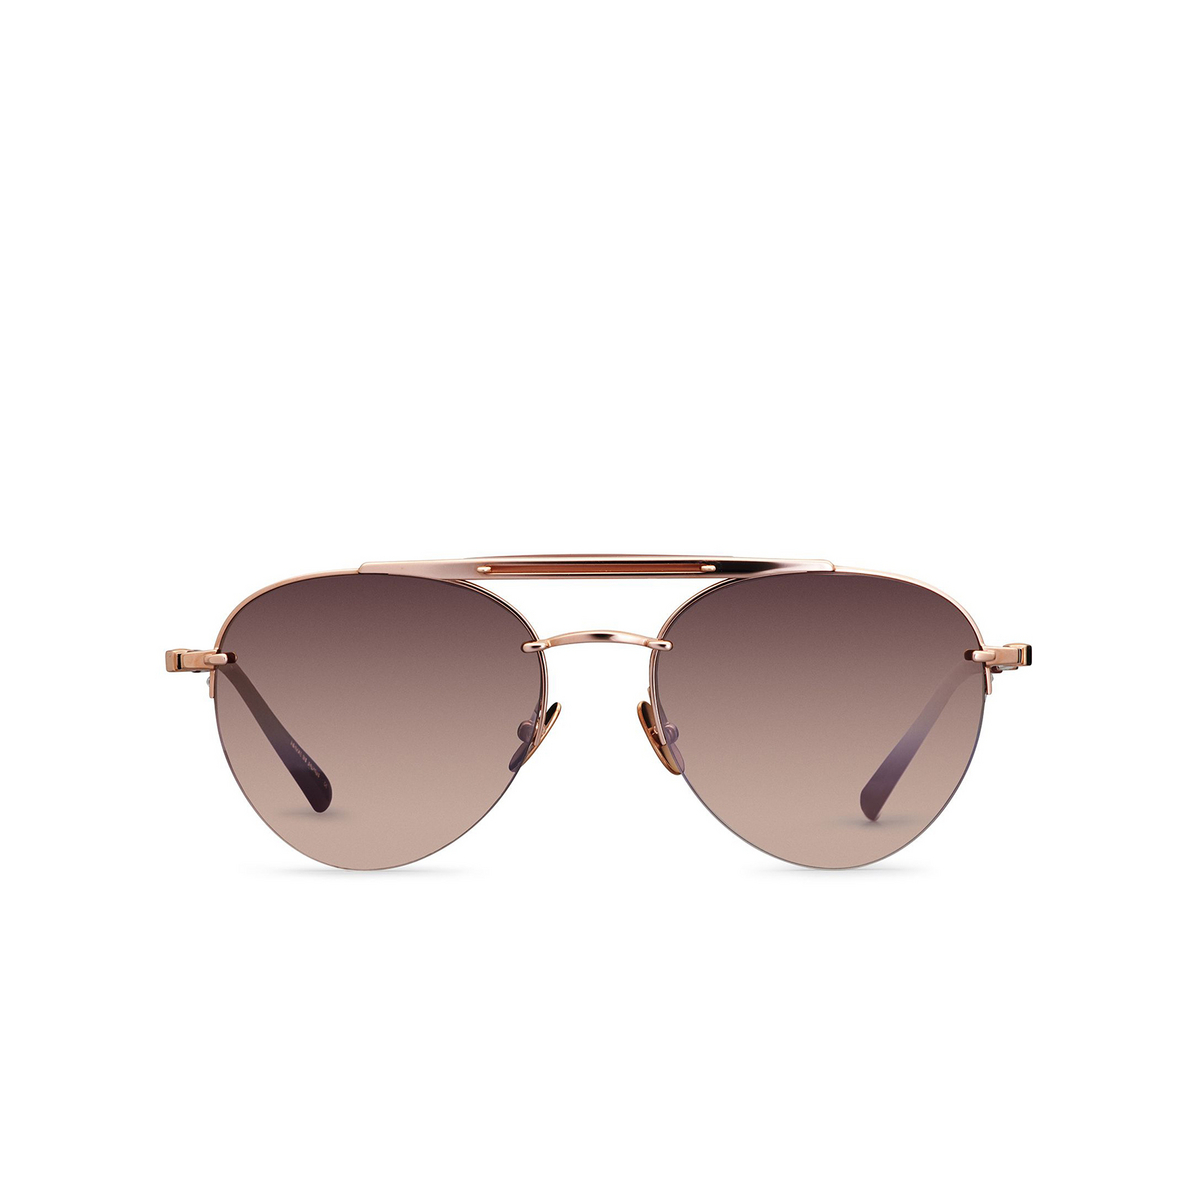 Mr. Leight RODEO SL Sunglasses 18KRG-RW/SU 18K Rose Gold-Rosewood - front view